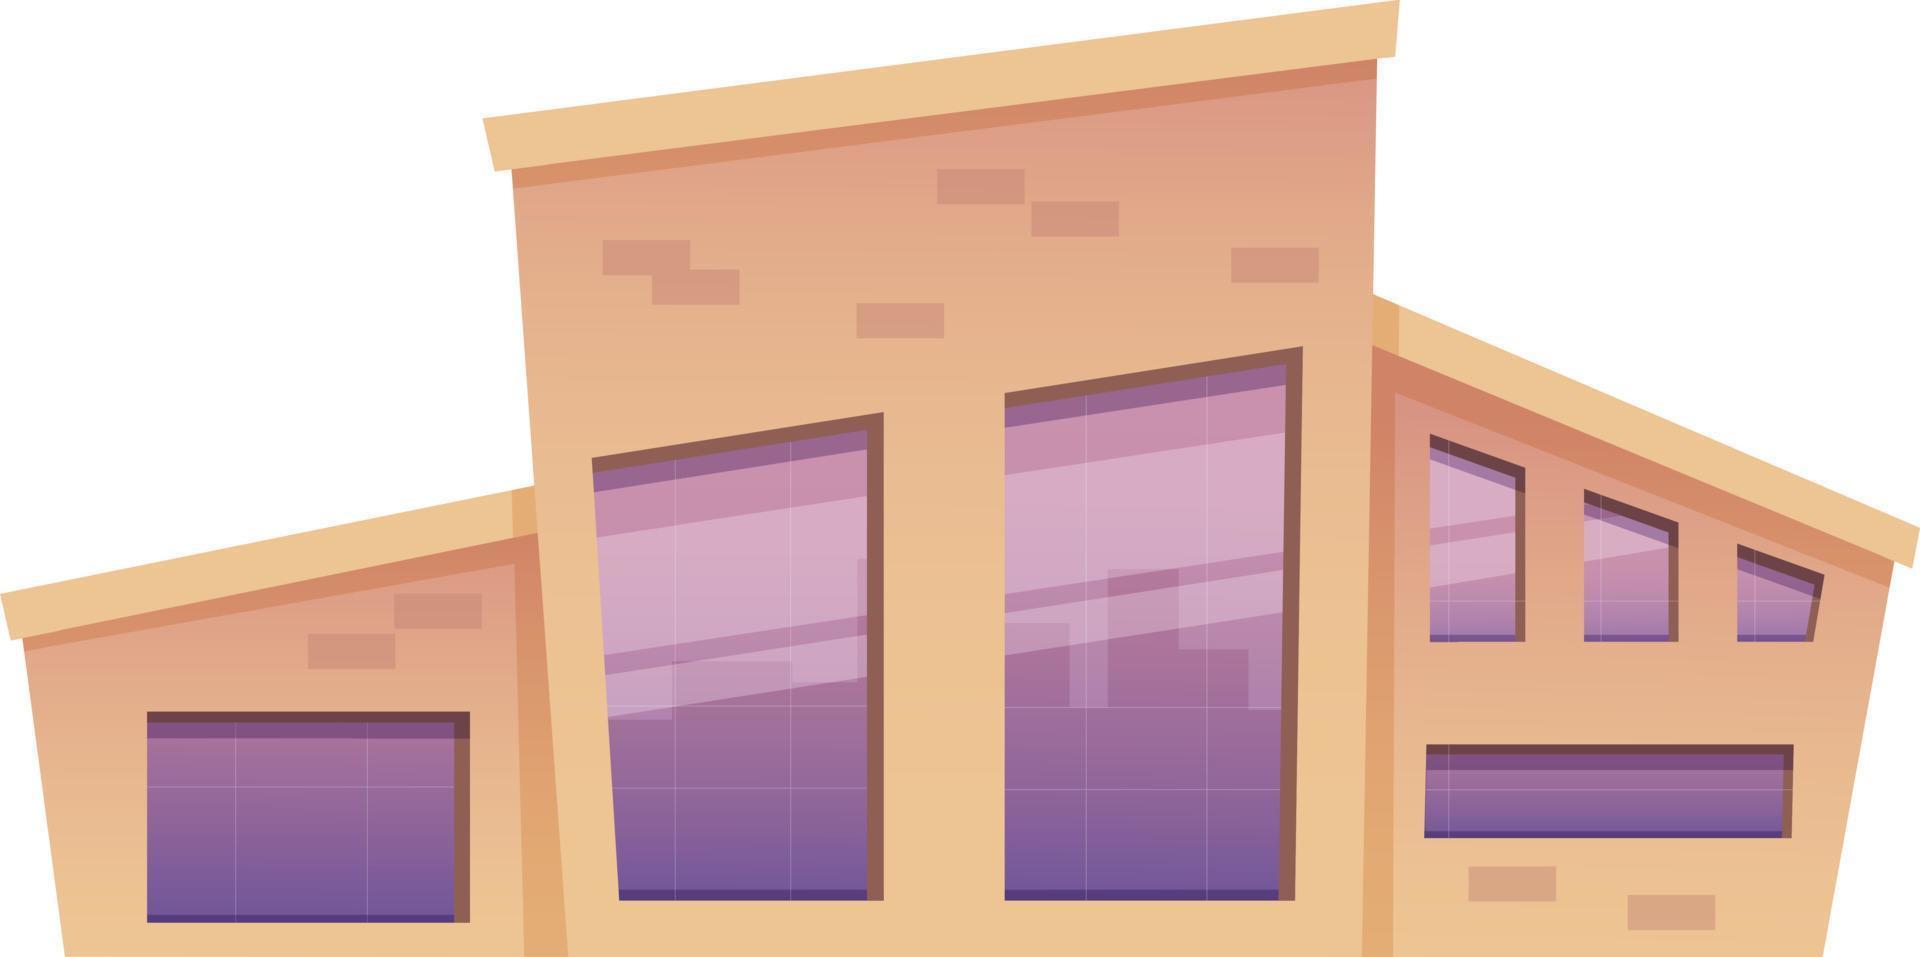 Cartoon building with glow in the windows on transparent background. Facade front view cartoon vector